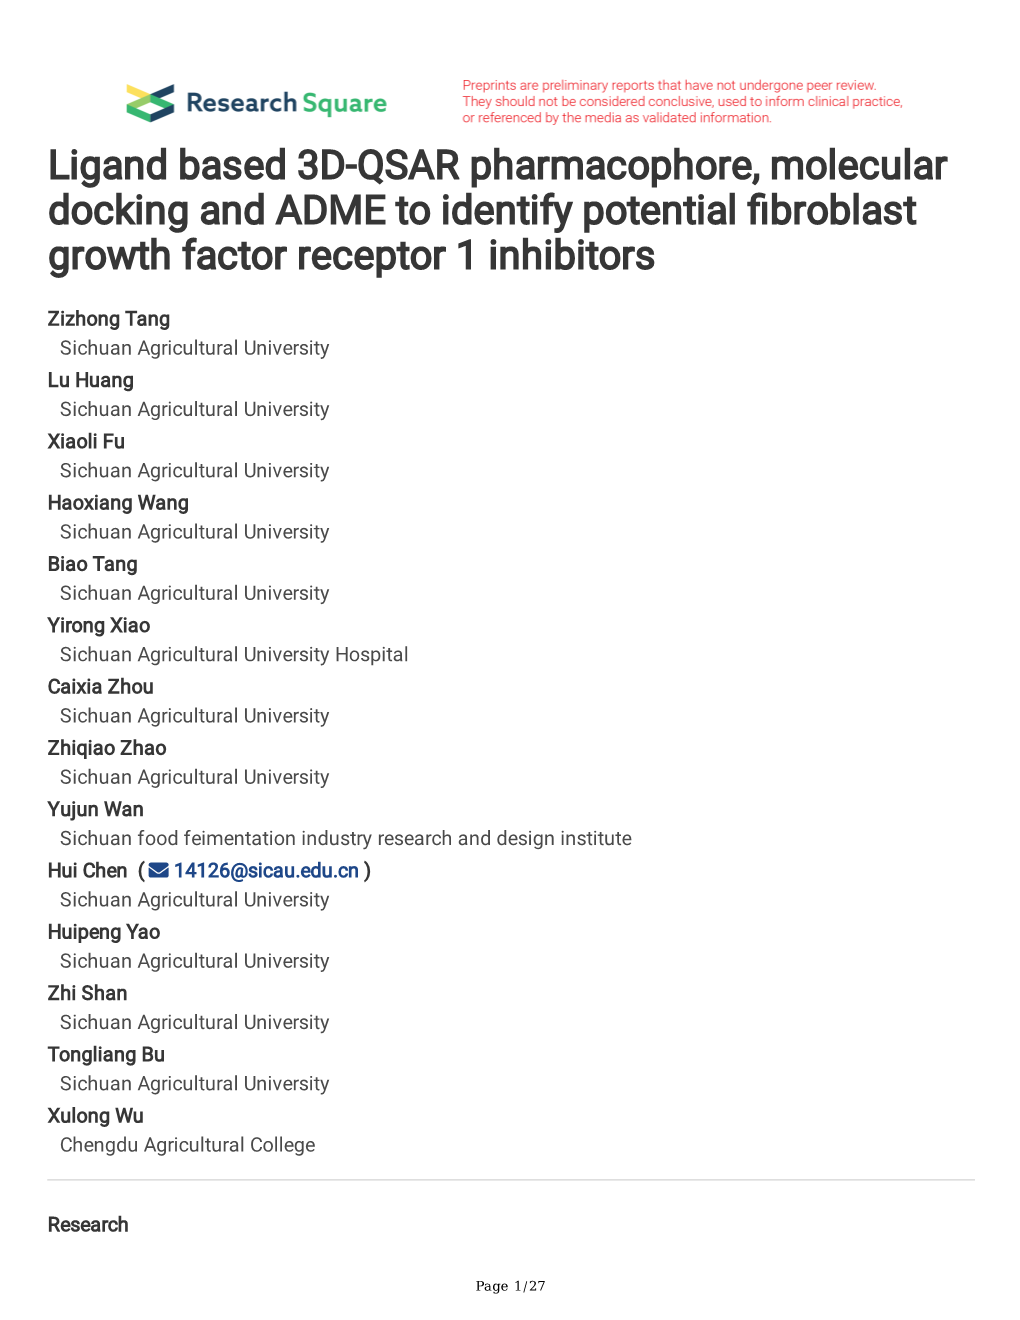 Ligand Based 3D-QSAR Pharmacophore, Molecular Docking and ADME to Identify Potential Broblast Growth Factor Receptor 1 Inhibitor